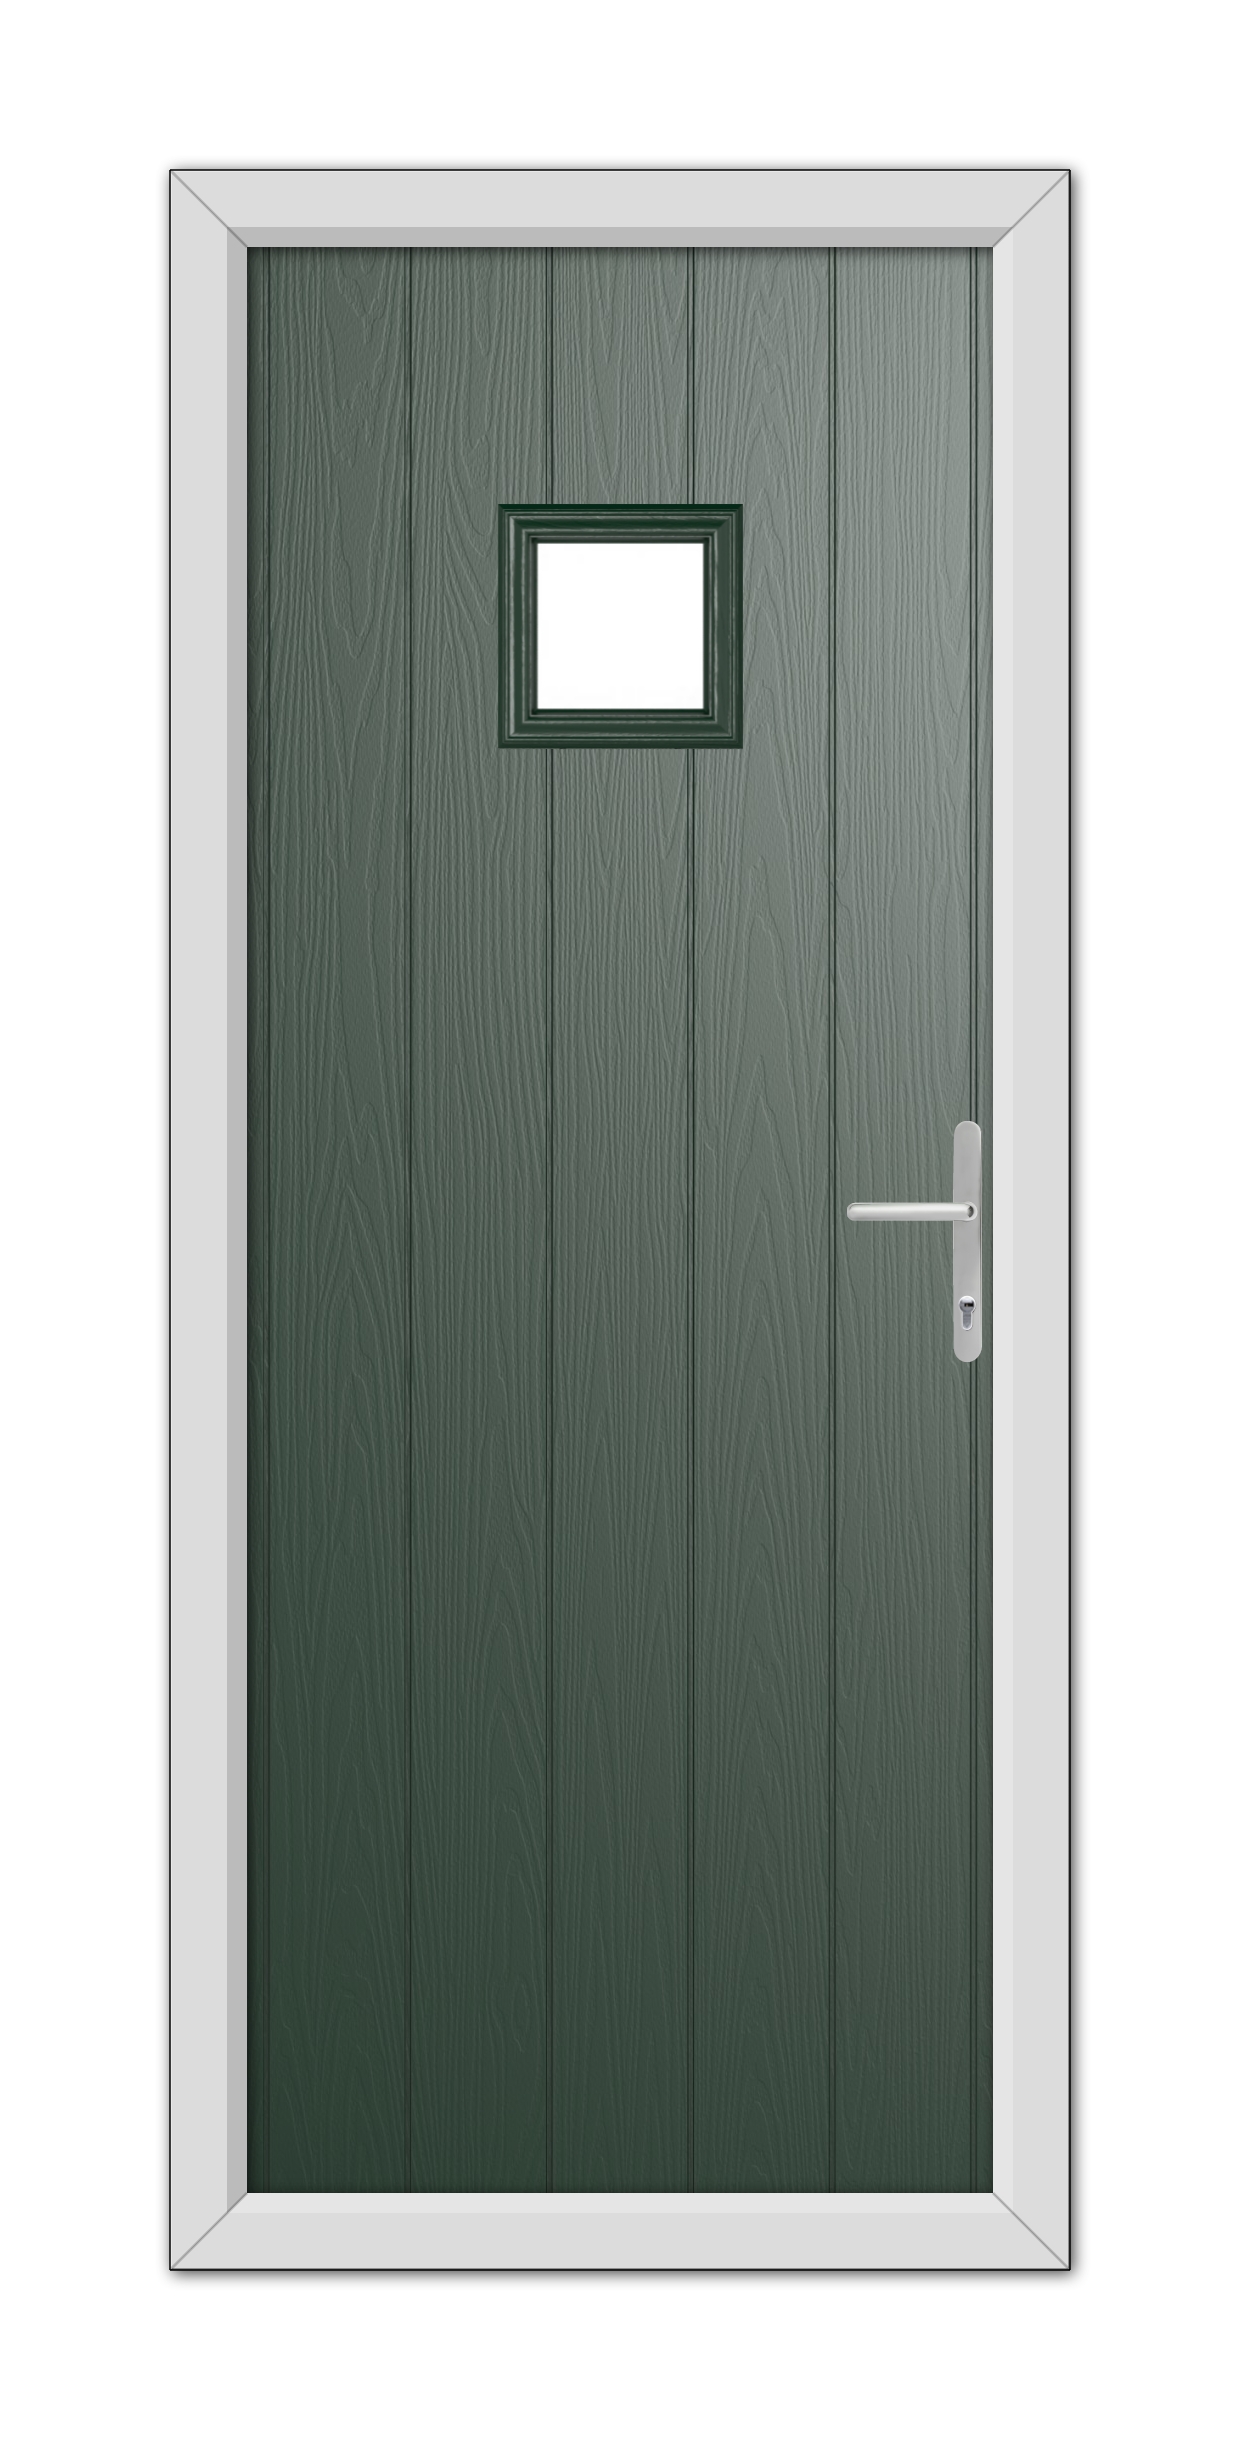 A Green Brampton Composite Door 48mm Timber Core with a small rectangular window at the top and a silver handle, set within a white door frame.